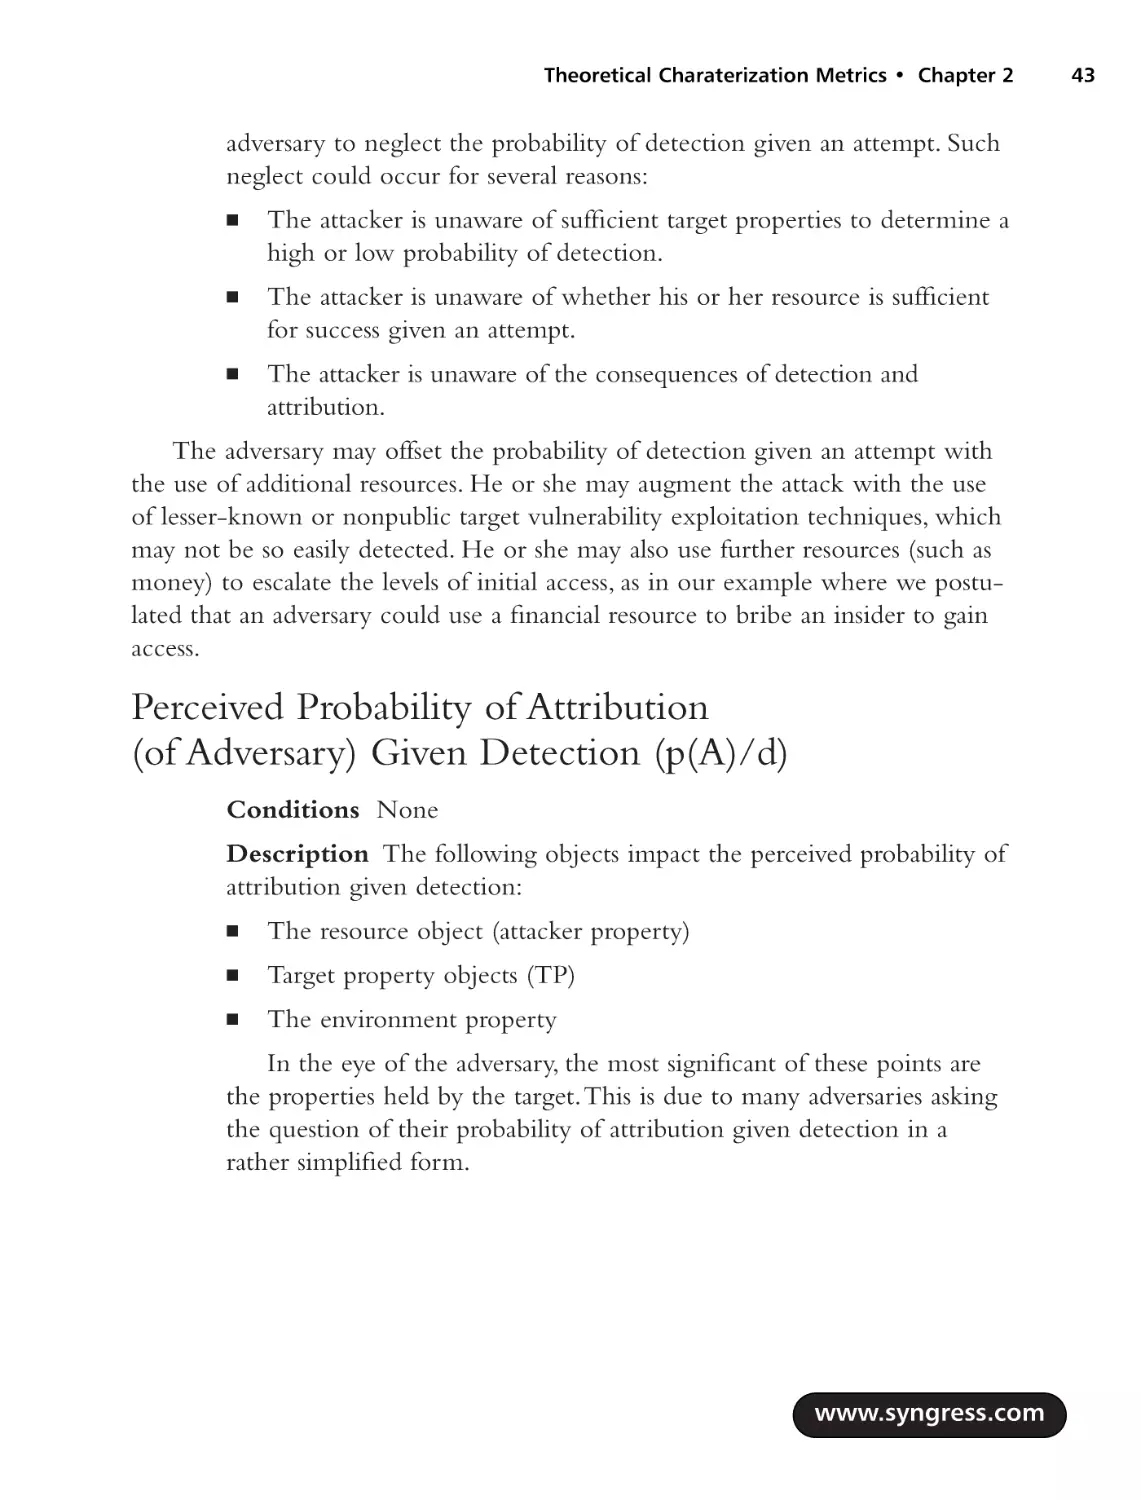 Perceived Probability of Attribution (of Adversary) Given Detection (p(A)/d)